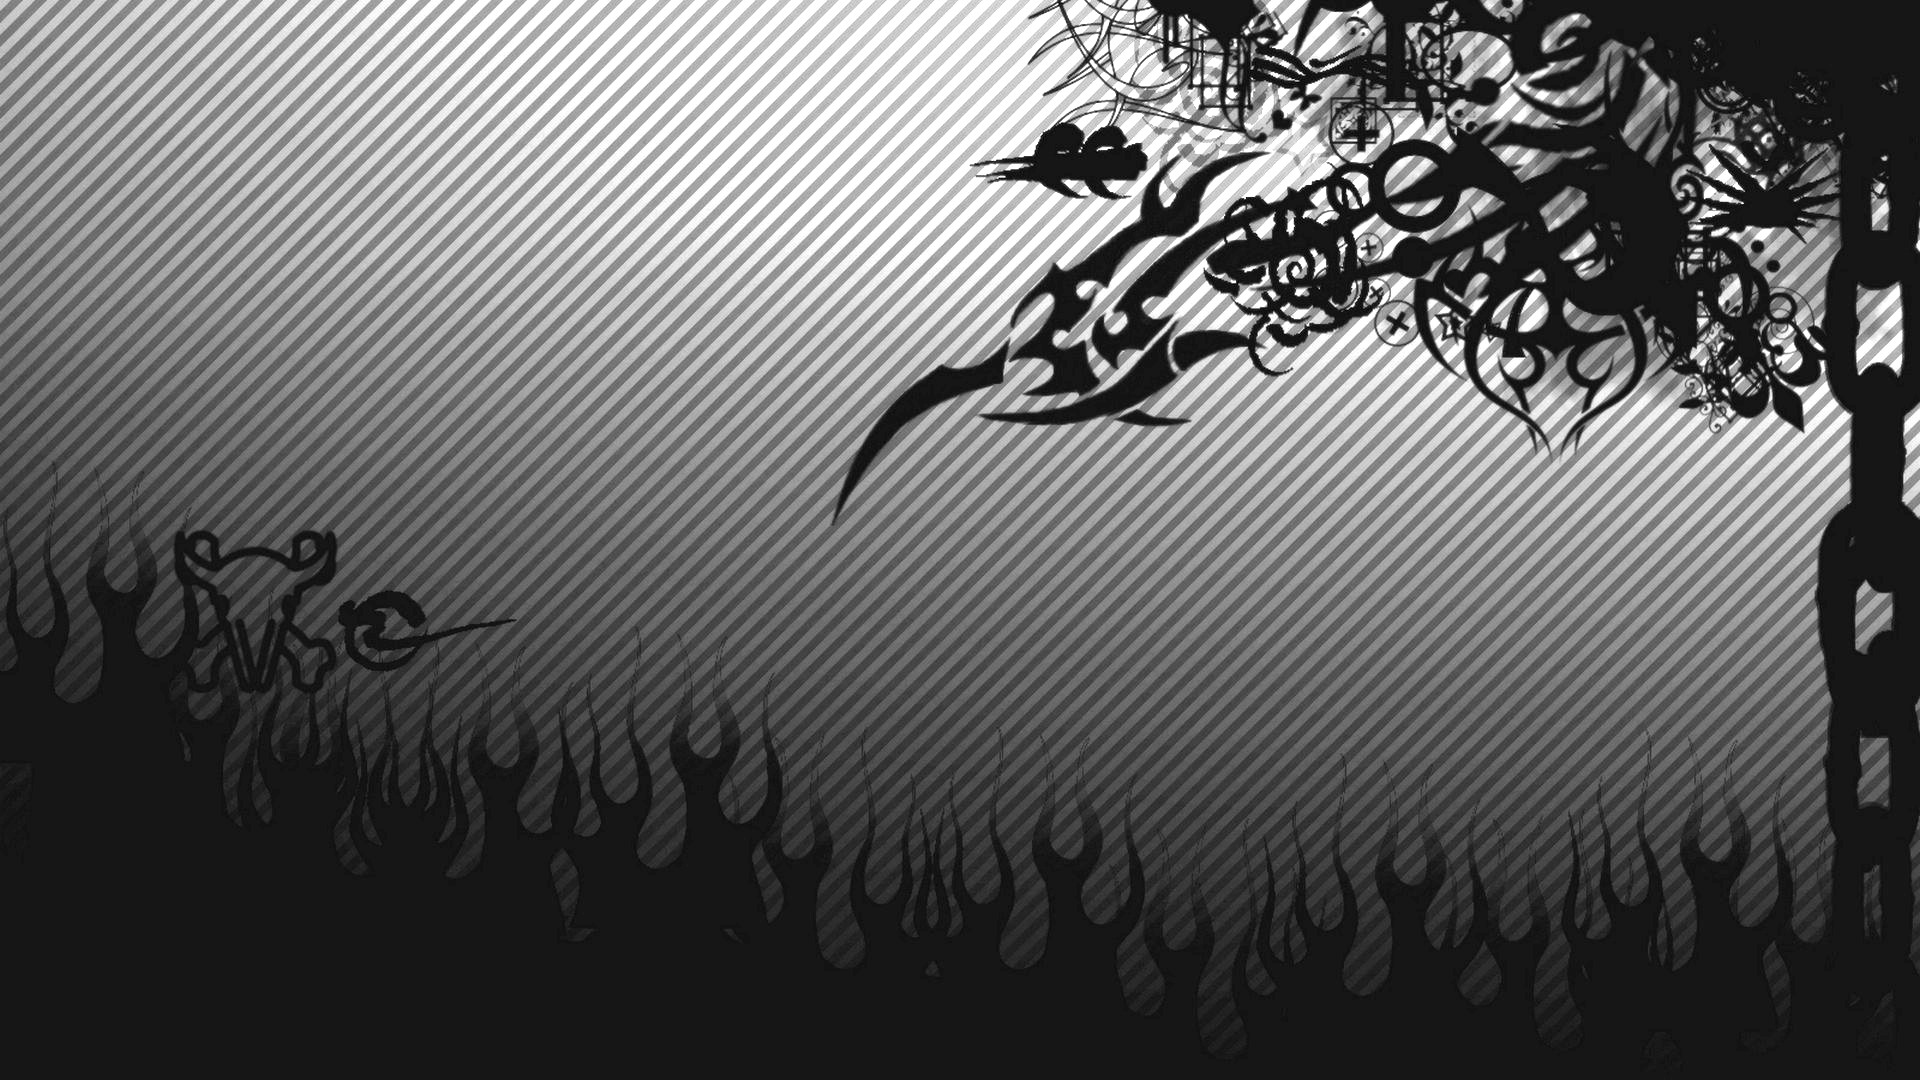 HD Wallpaper Cool Black with high-resolution 1920x1080 pixel. You can use this wallpaper for your Desktop Computer Backgrounds, Mac Wallpapers, Android Lock screen or iPhone Screensavers and another smartphone device